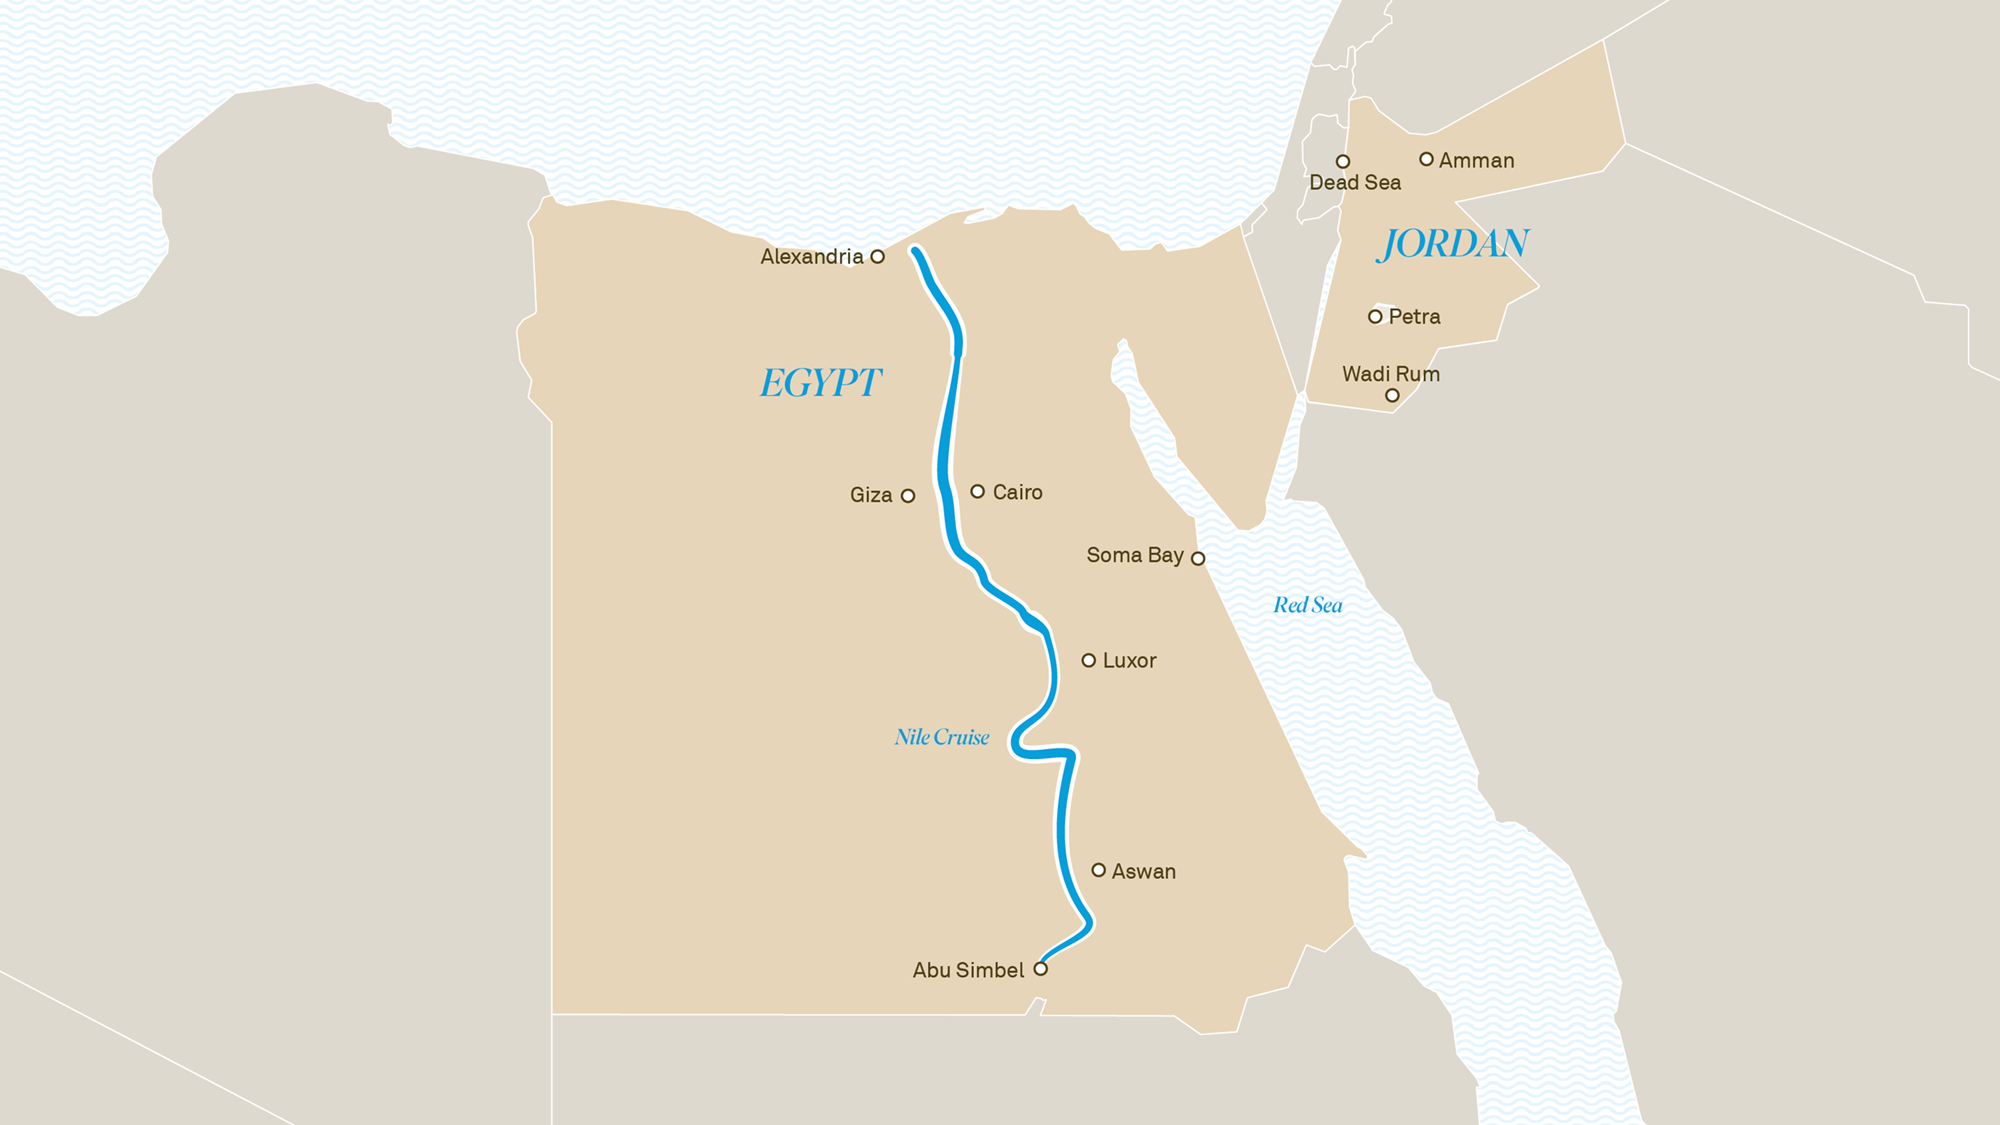 Scenic Land touring destinations in Egypt & the Middle East